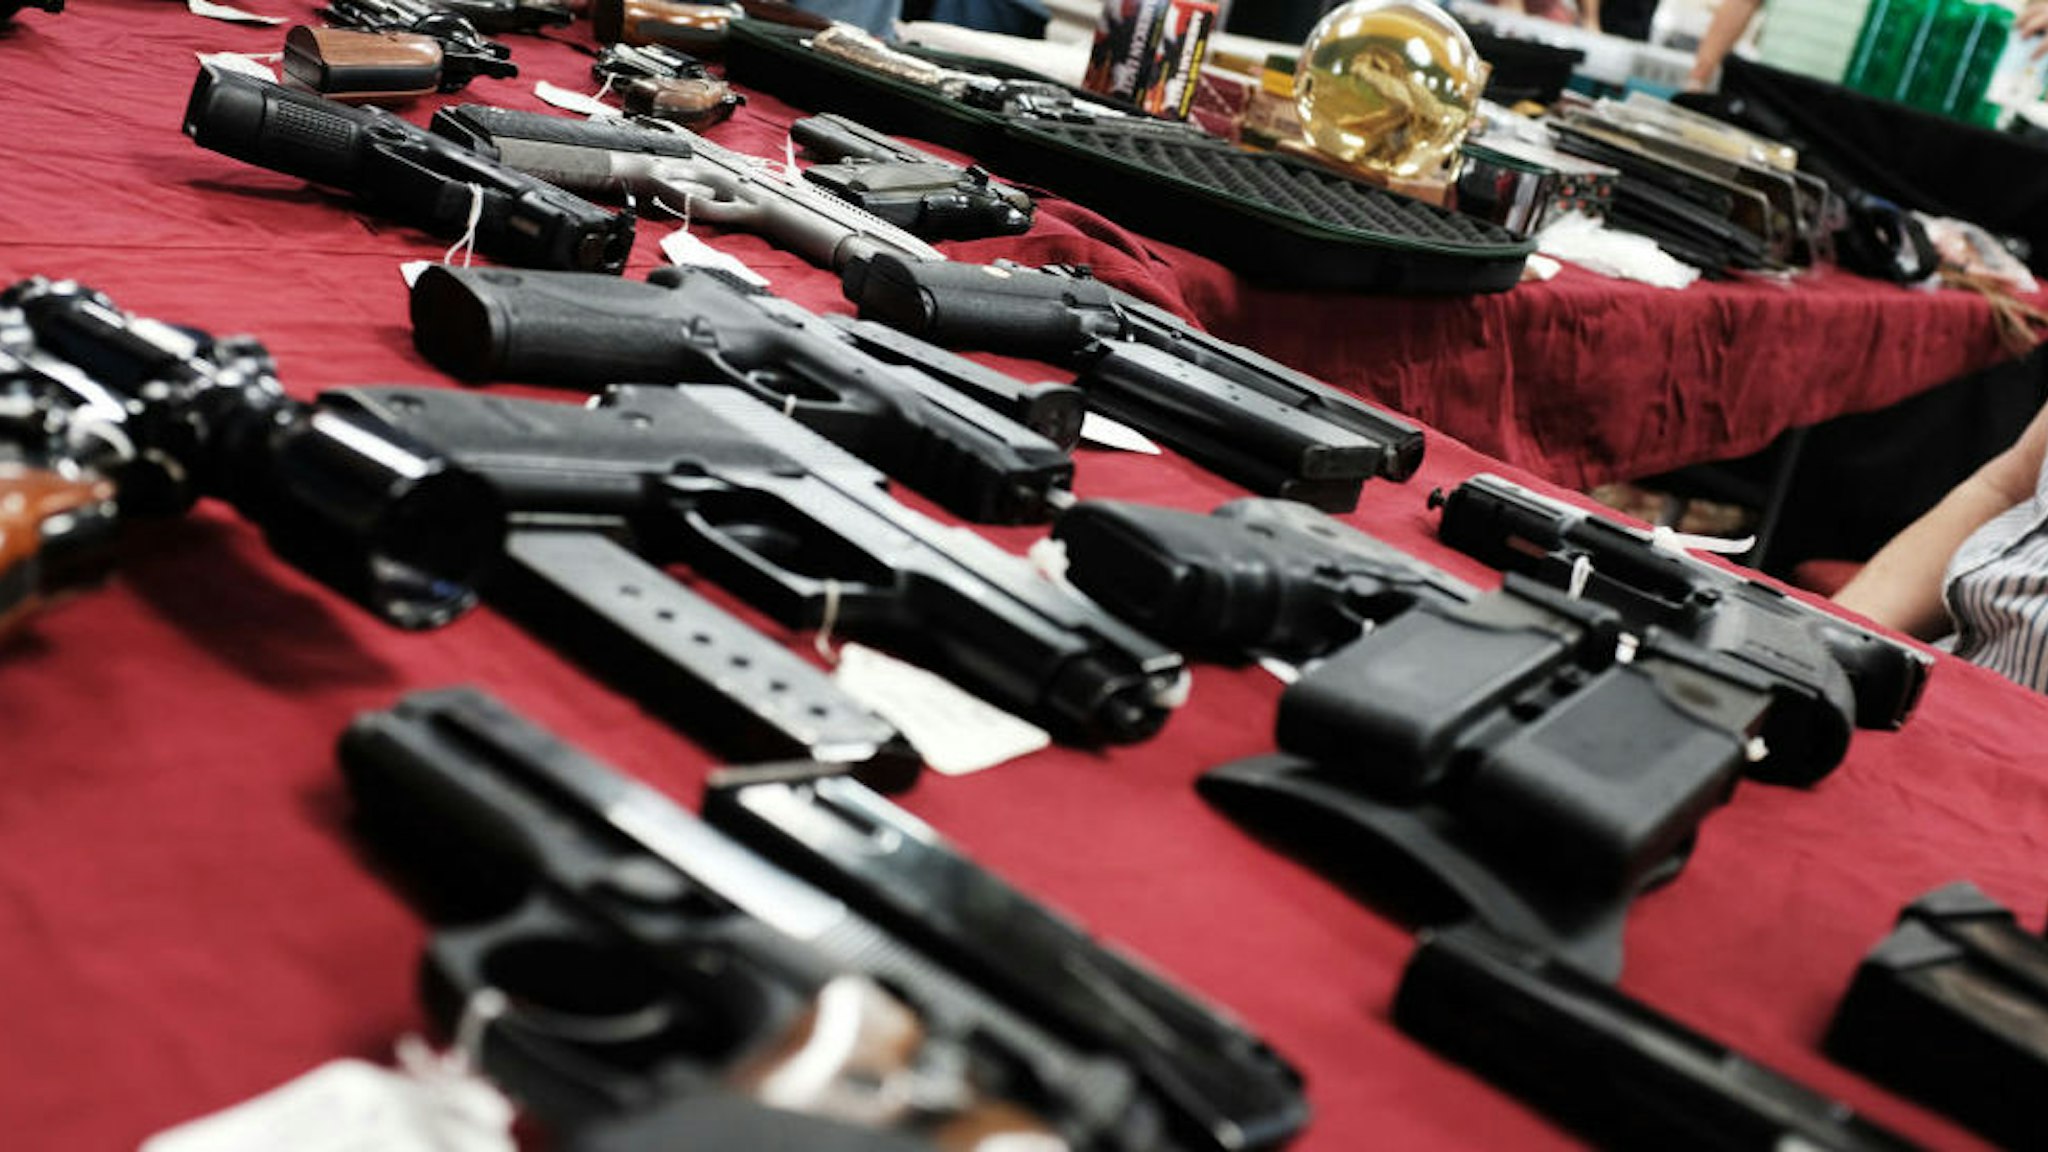 Guns stand for sale at a gun show on November 24, 2018 in Naples, Florida. According to recently released data from the U.S. centers for Disease Control and Prevention, suicides and homicides involving guns have been increasing in America. The report, which faced a large backlash from the gun rights lobby, showed that during the time period between 2015-2016, there were 27,394 homicides involving guns and 44,955 gun suicides in America. (Photo by Spencer Platt/Getty Images)